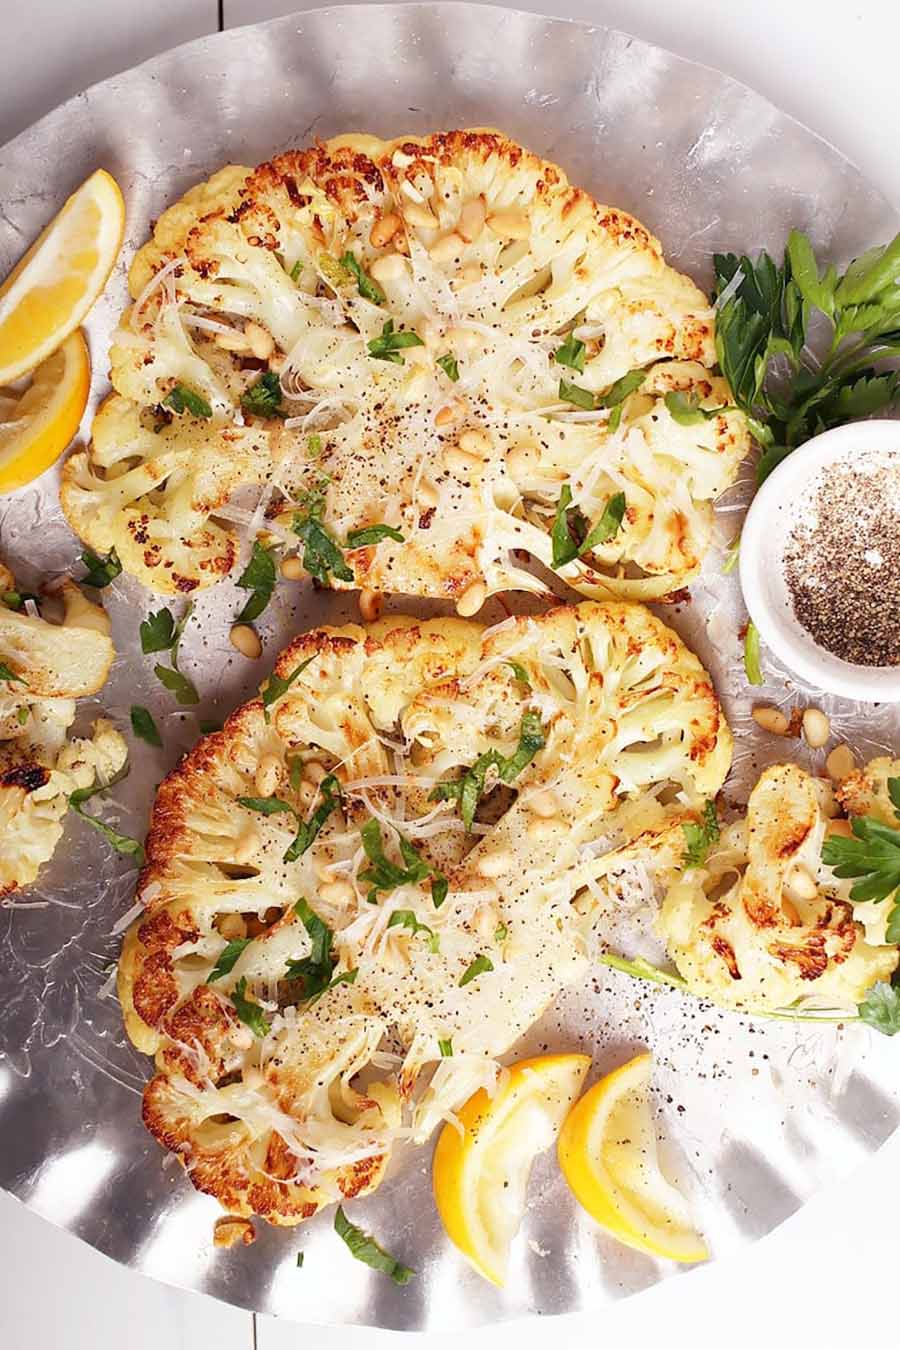 Overhead view of cauliflower steaks sitting on a silver platter with a few lemon wedges nearby.